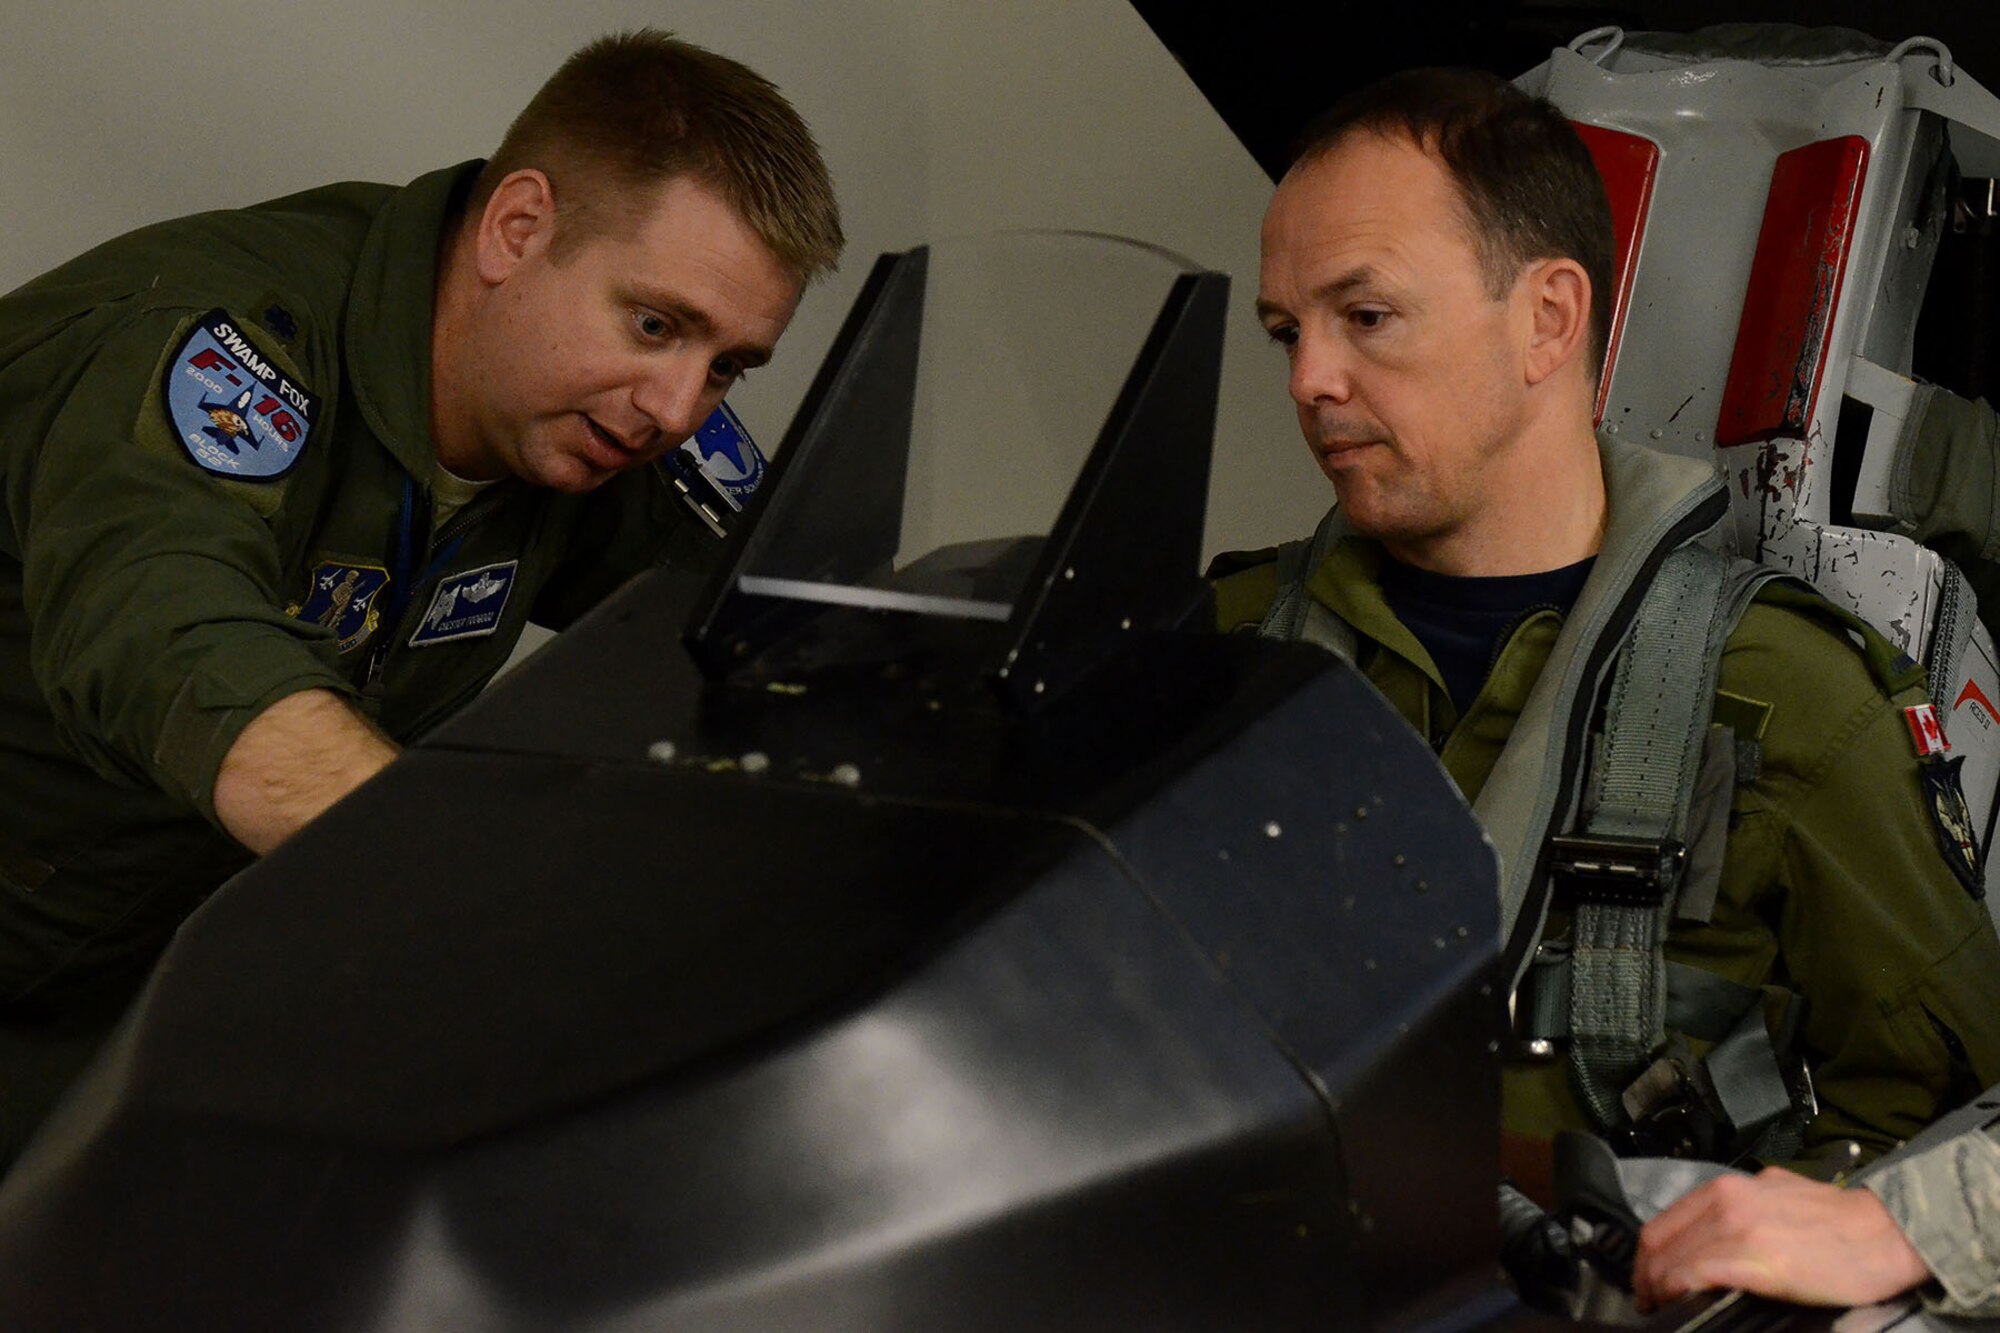 Canadian Forces Brig. Gen. Alain Pelletier, deputy commander Continental United States NORAD Region (CONR), receives and orientation flight on an F-16 Fighting Falcon fighter jet accompanied by Lt. Col. Ian Toogood, commander of the 169th Aerospace Control Alert Squadron, during his visit to the South Carolina Air National Guard's 169th Fighter Wing at McEntire Joint National Guard Station, Mar. 1, 2016. During his visit, Brig. Gen. Pelletier spoke to wing leadership about its homeland defense mission and the relationship it has with the NORAD air component as it is tasked through CONR to ensure North American airspace control. The 169th FW has provided support for numerous CONR training and air defense events in past years. (U.S. Air National Guard photo by Senior Airman Ashleigh S. Pavelek) 